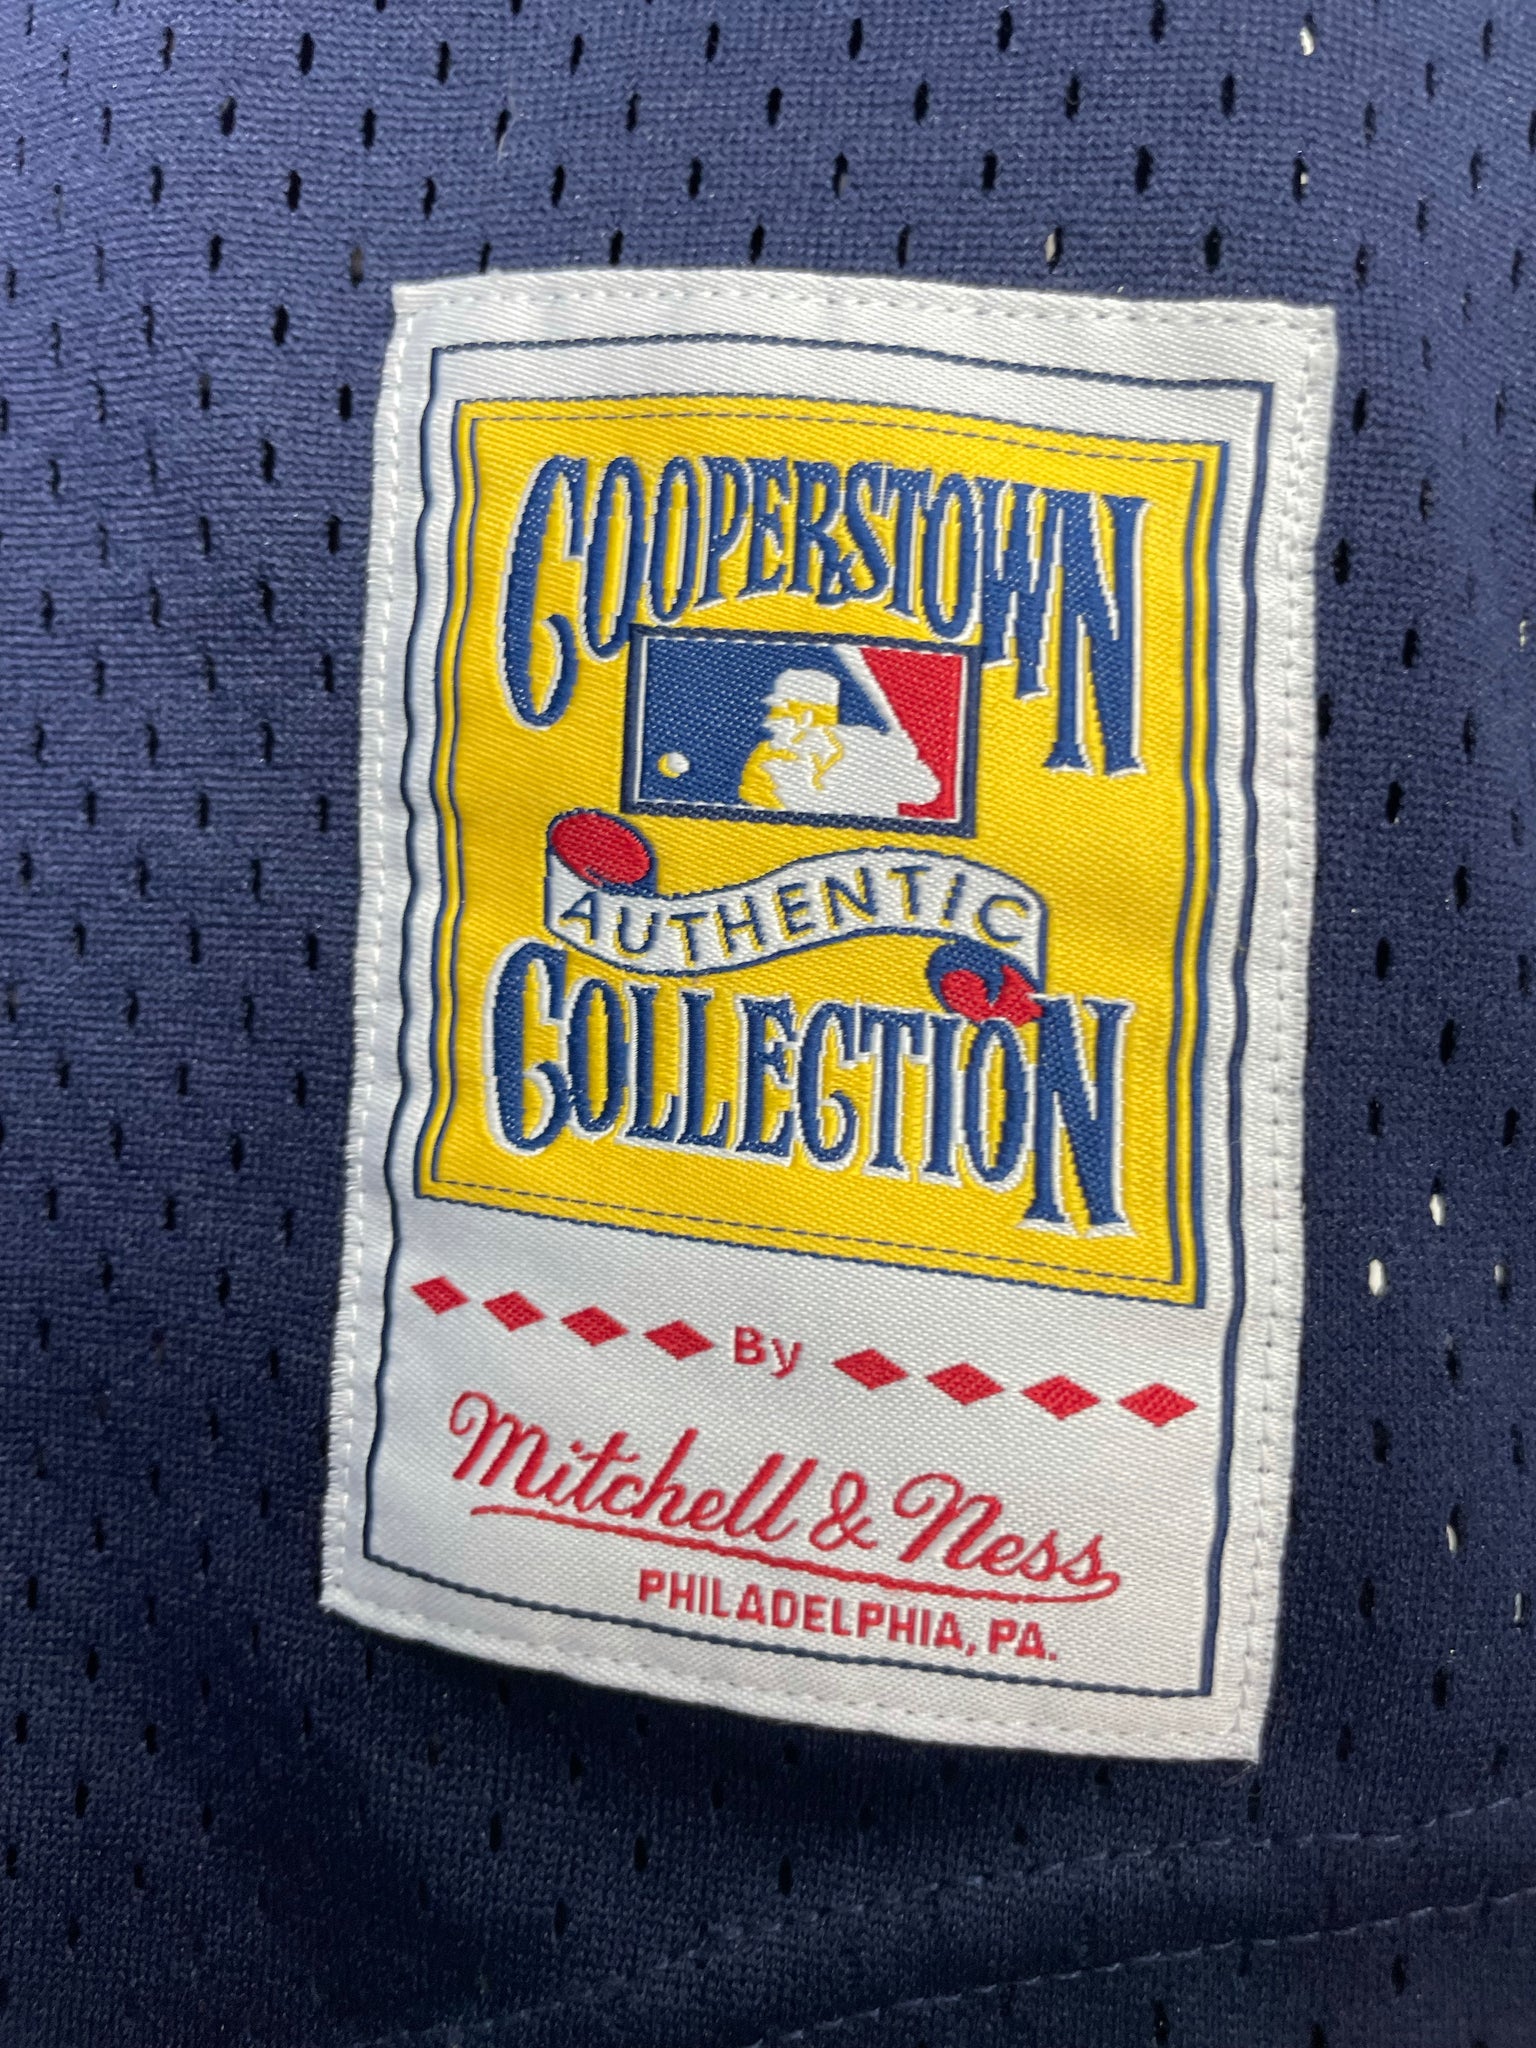 Mitchell & Ness Ted Williams Boston Red Sox 1990 Authentic